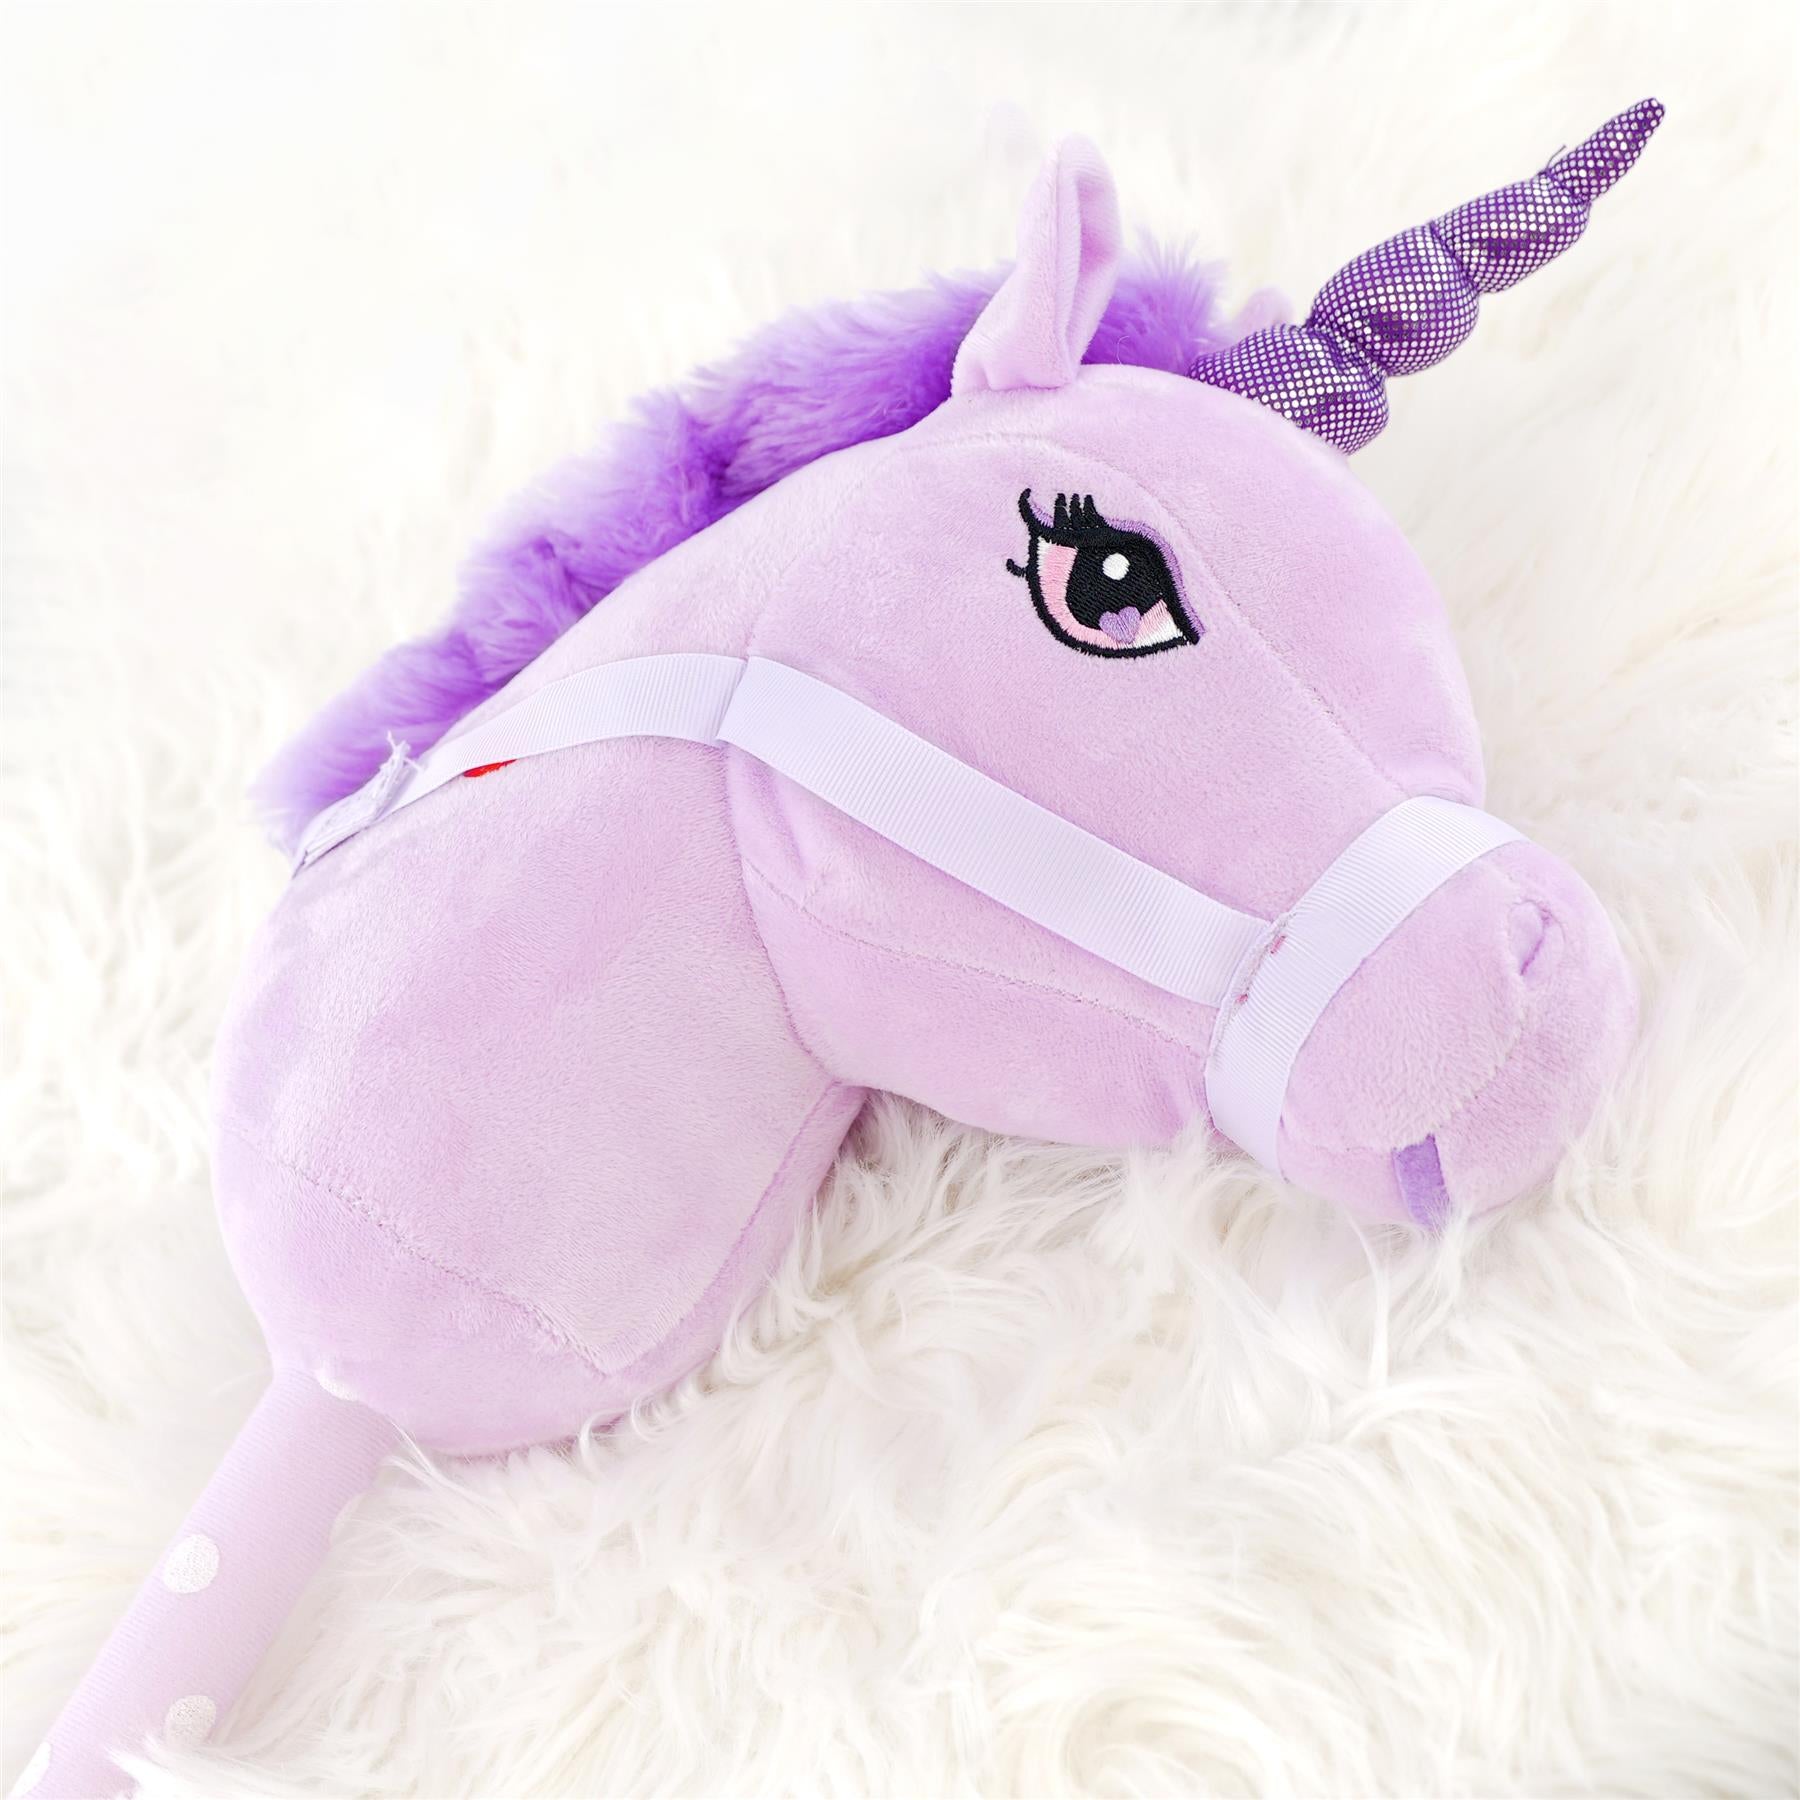 Lilac Hobby Horse by The Magic Toy Shop - The Magic Toy Shop